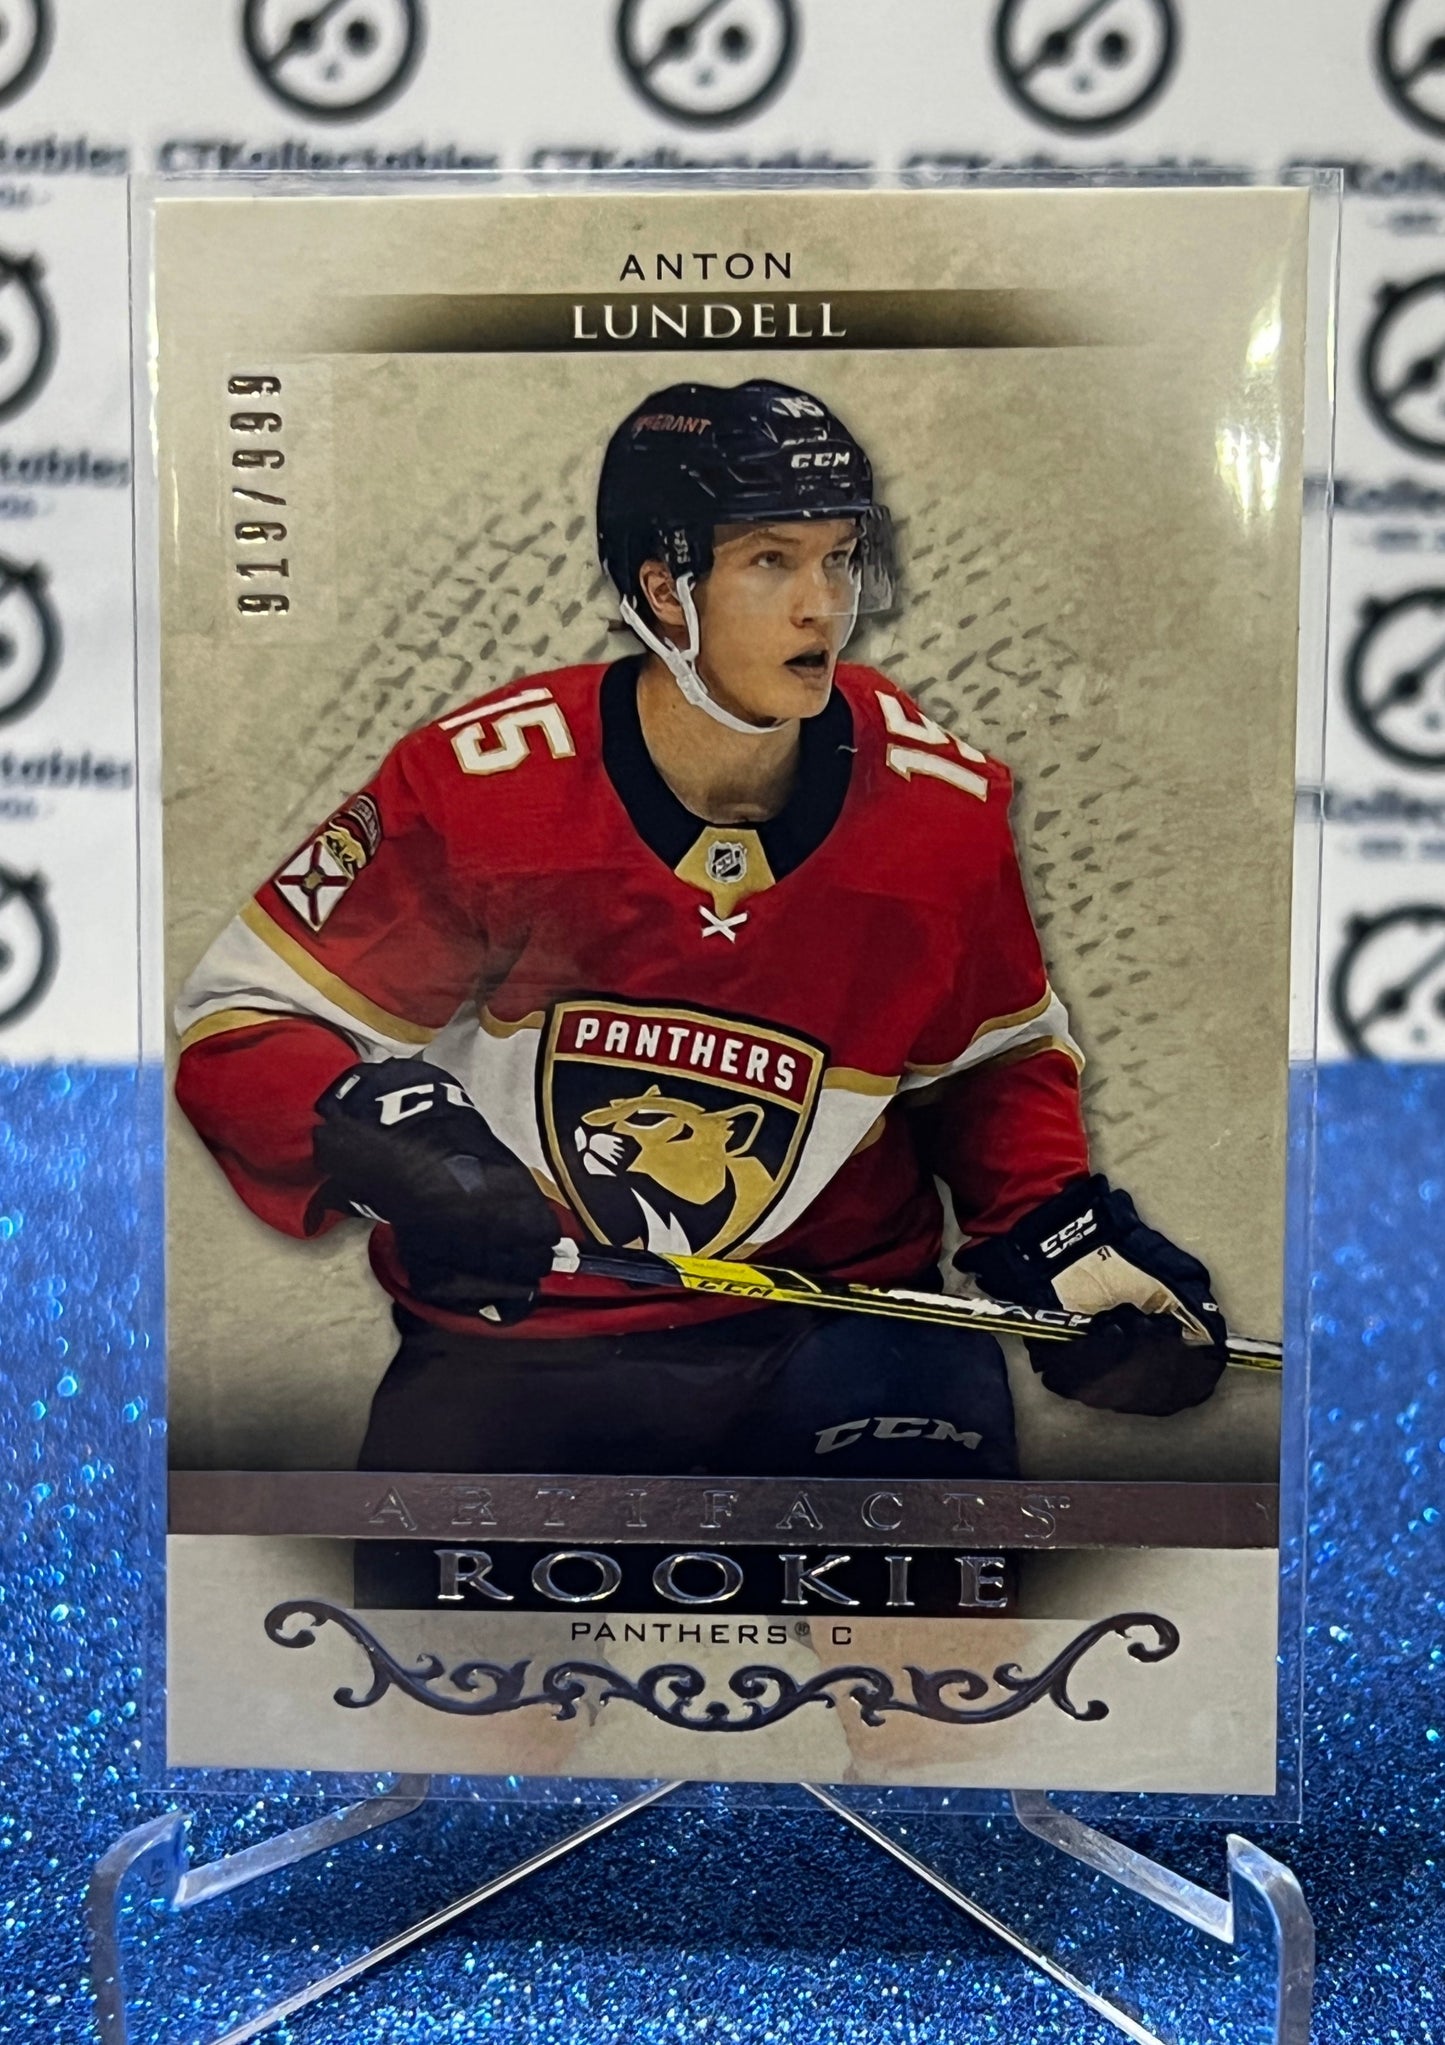 2021-22 UPPER DECK ARTIFACTS  ANTON LUNDELL # RED193 ROOKIE /999  FLORIDA PANTHERS HOCKEY CARD